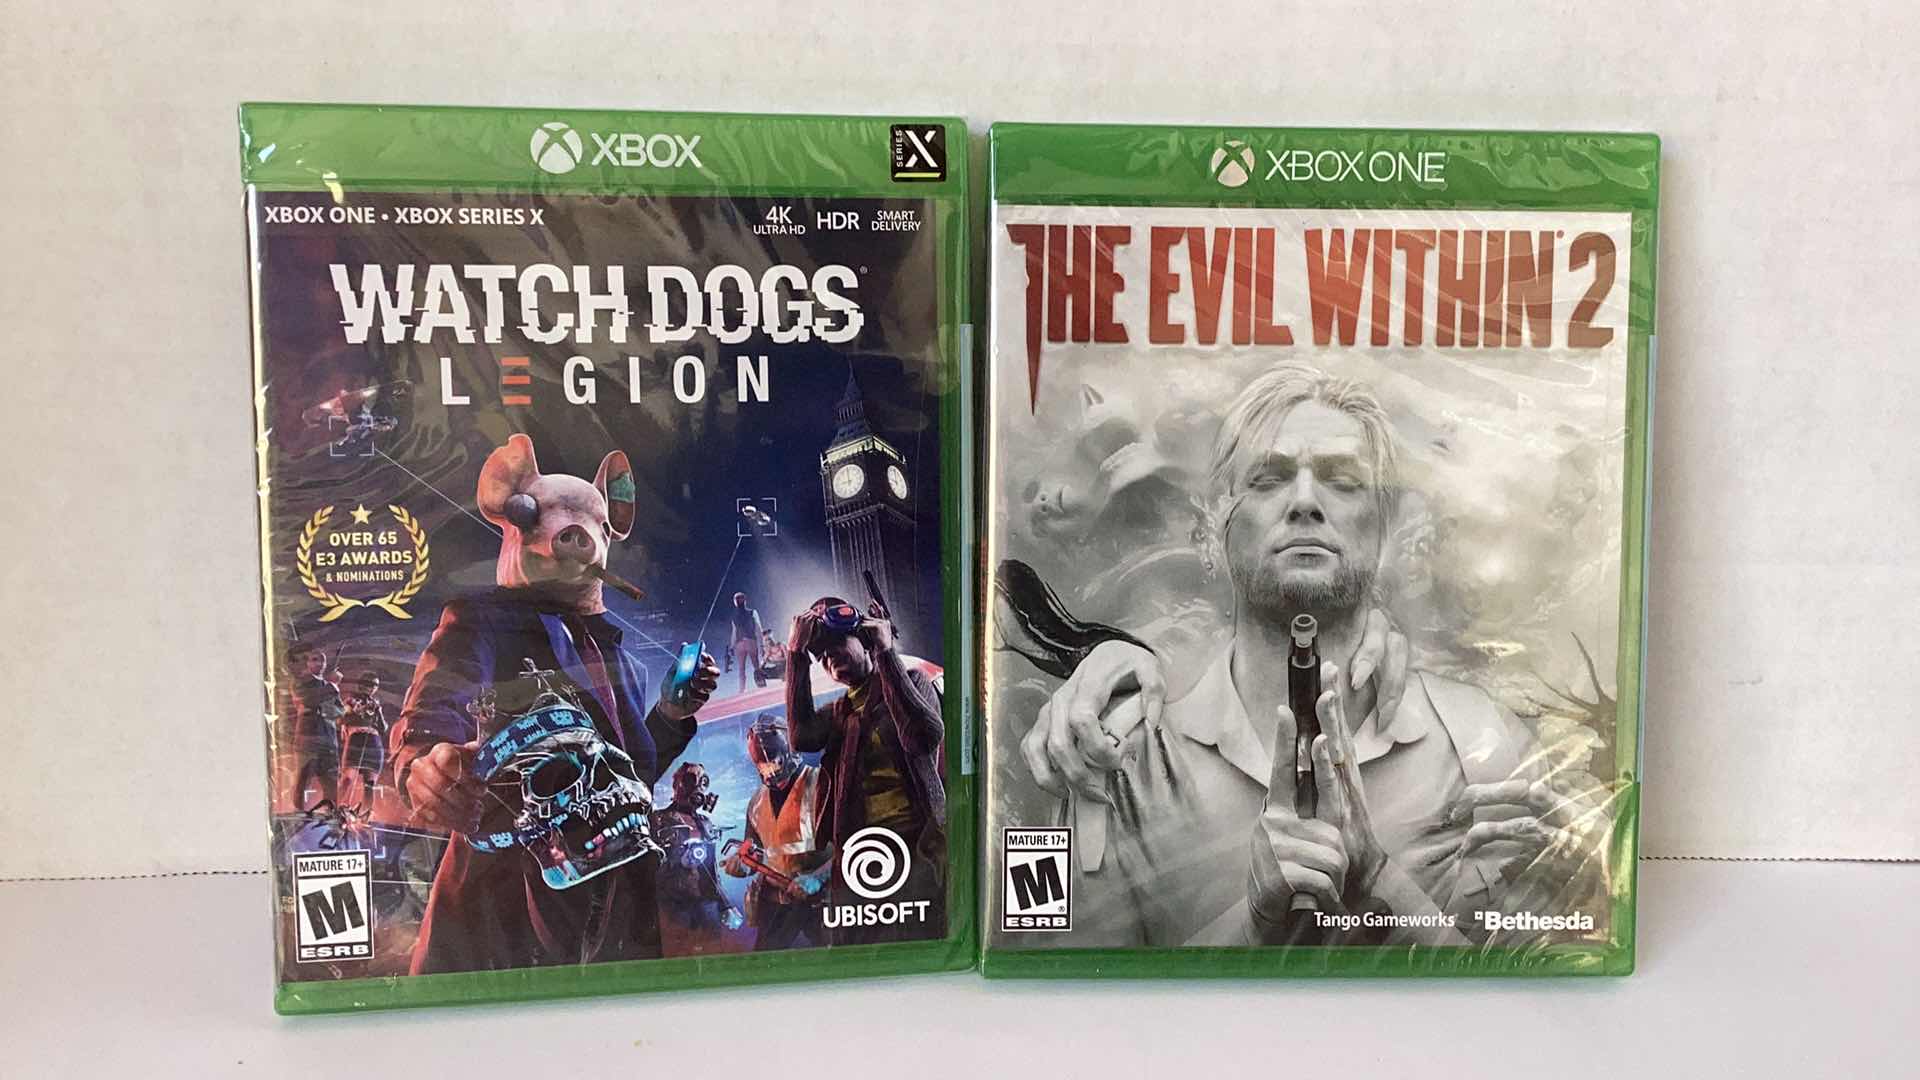 Photo 1 of 2 NEW X-BOX GAMES: WATCH DOGS LEGION AND THE EVIL WITHIN 2